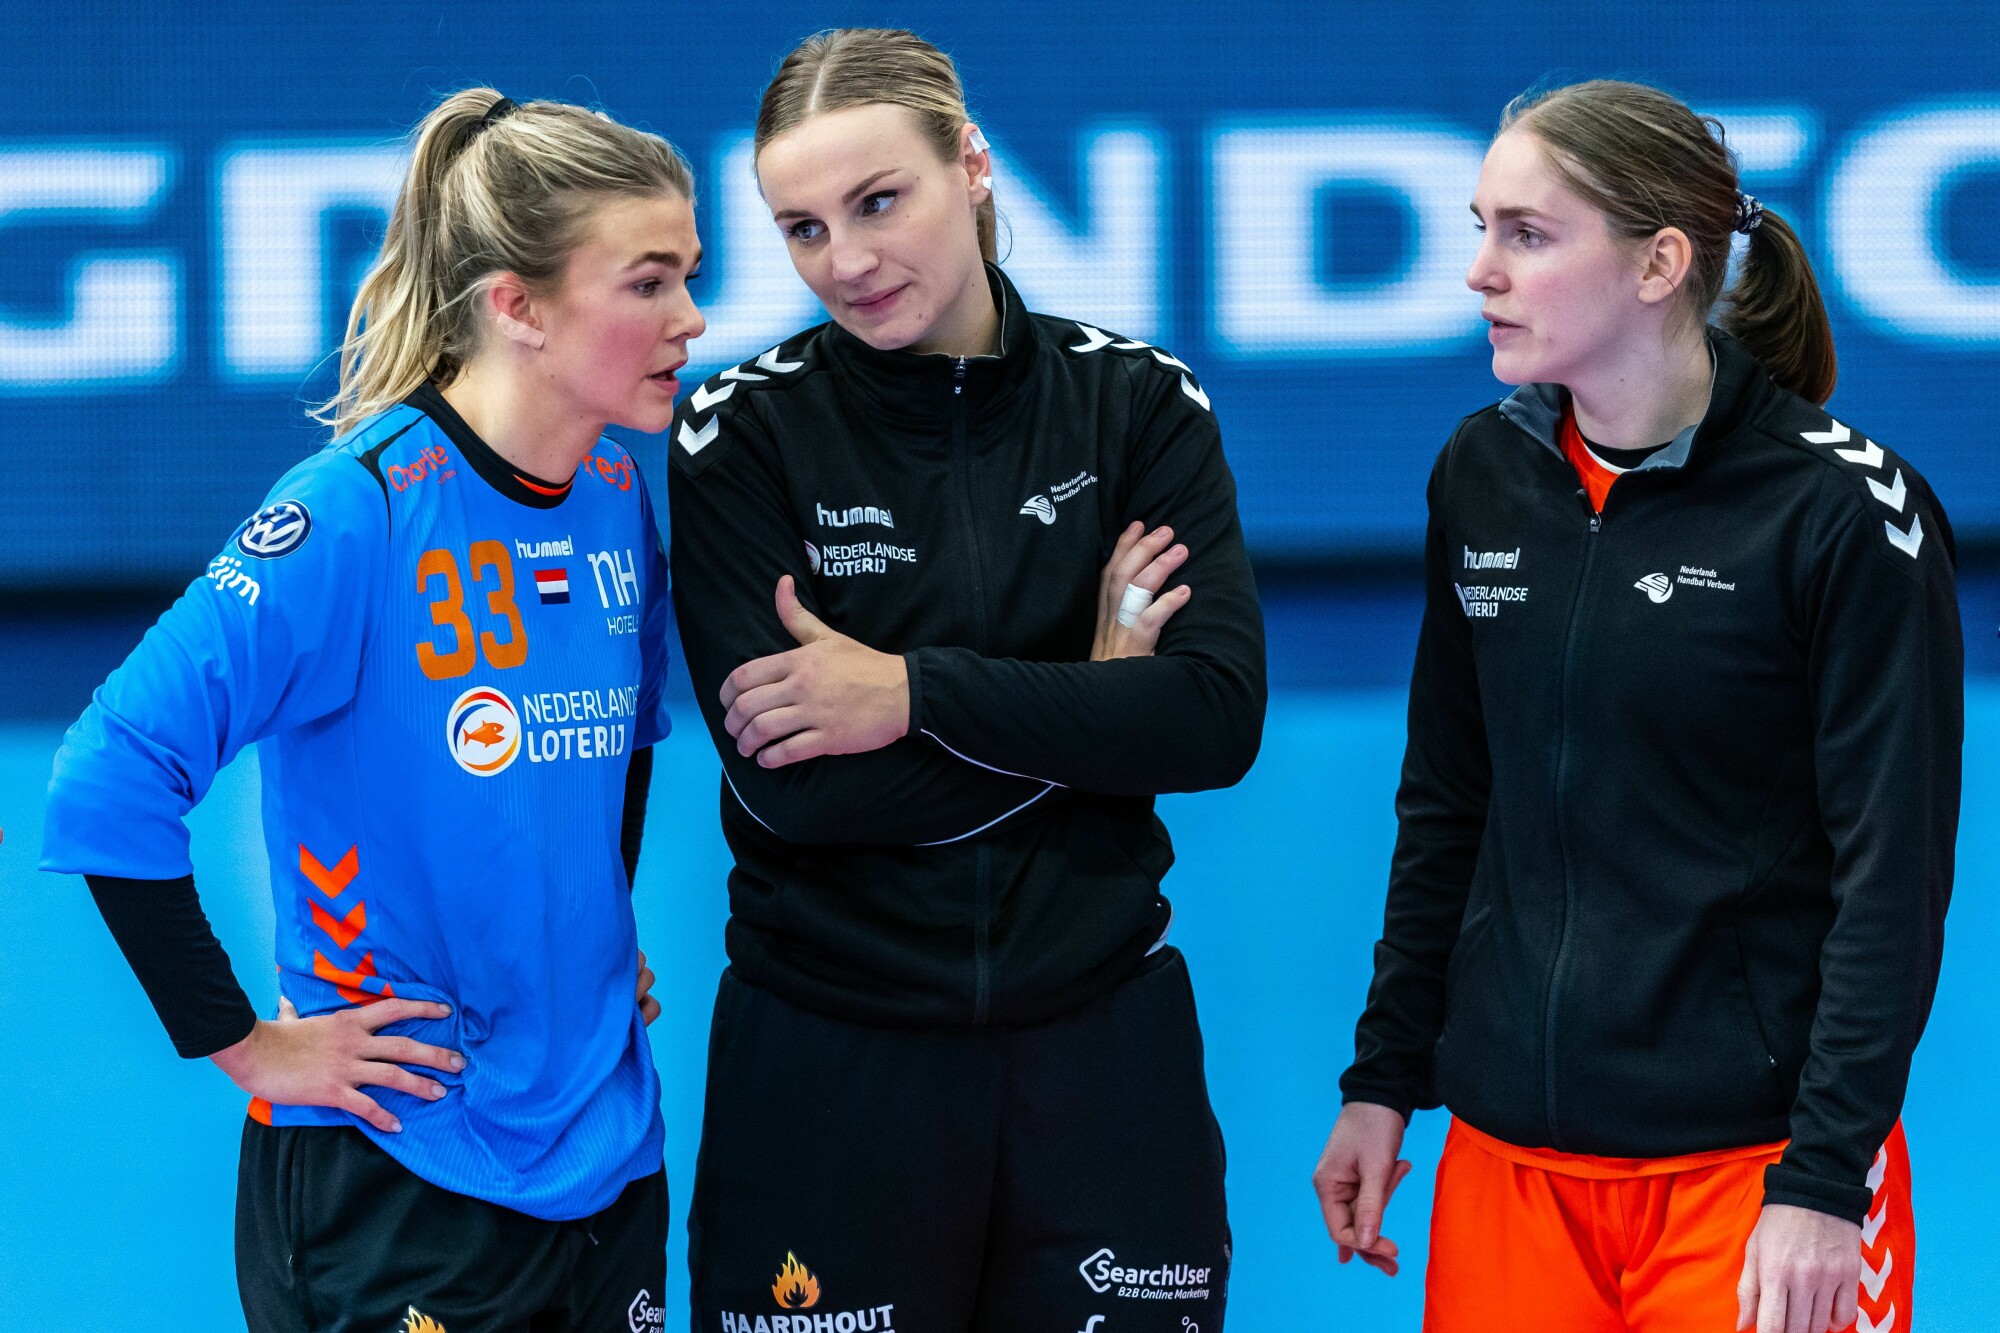 KOLDING - The Dutch handball players from left to right Tess Wester, Rinka Duijndam, Laura Van Der Heijden are disappointed after the match against Germany during the second round of the European Championship handball for women. ANP RONALD HOOGENDOORN  